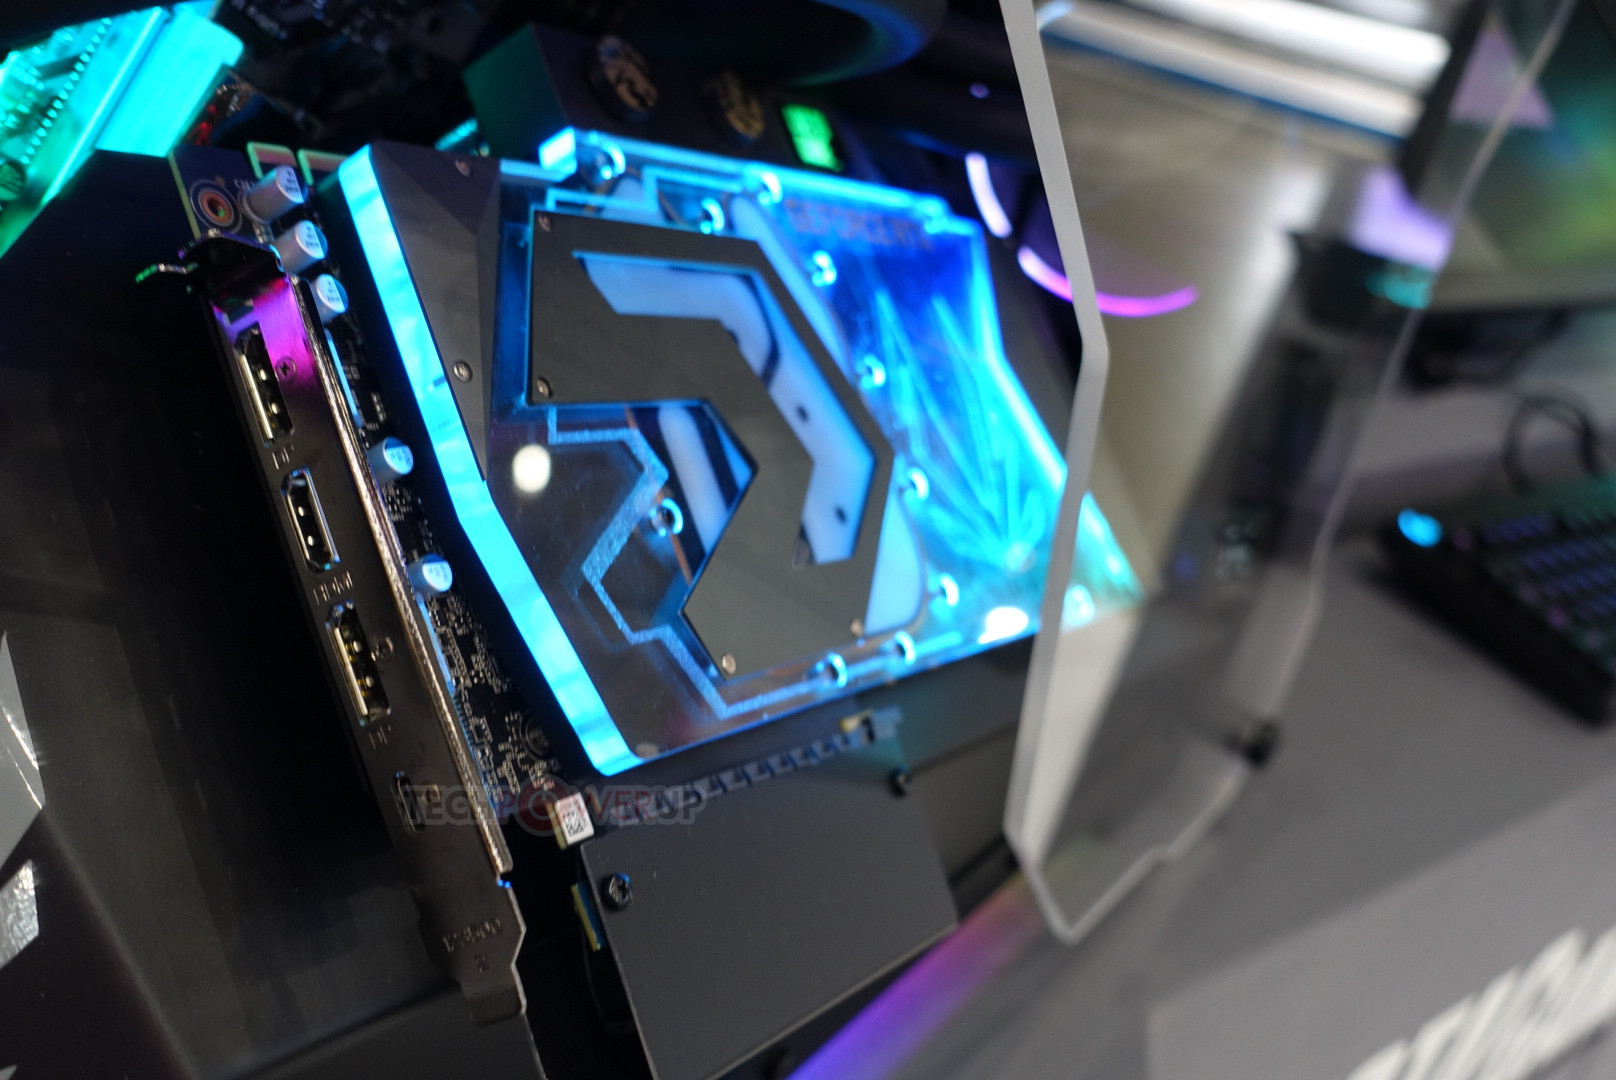 Slims Down its RTX 2080 to Single-Slot | TechPowerUp